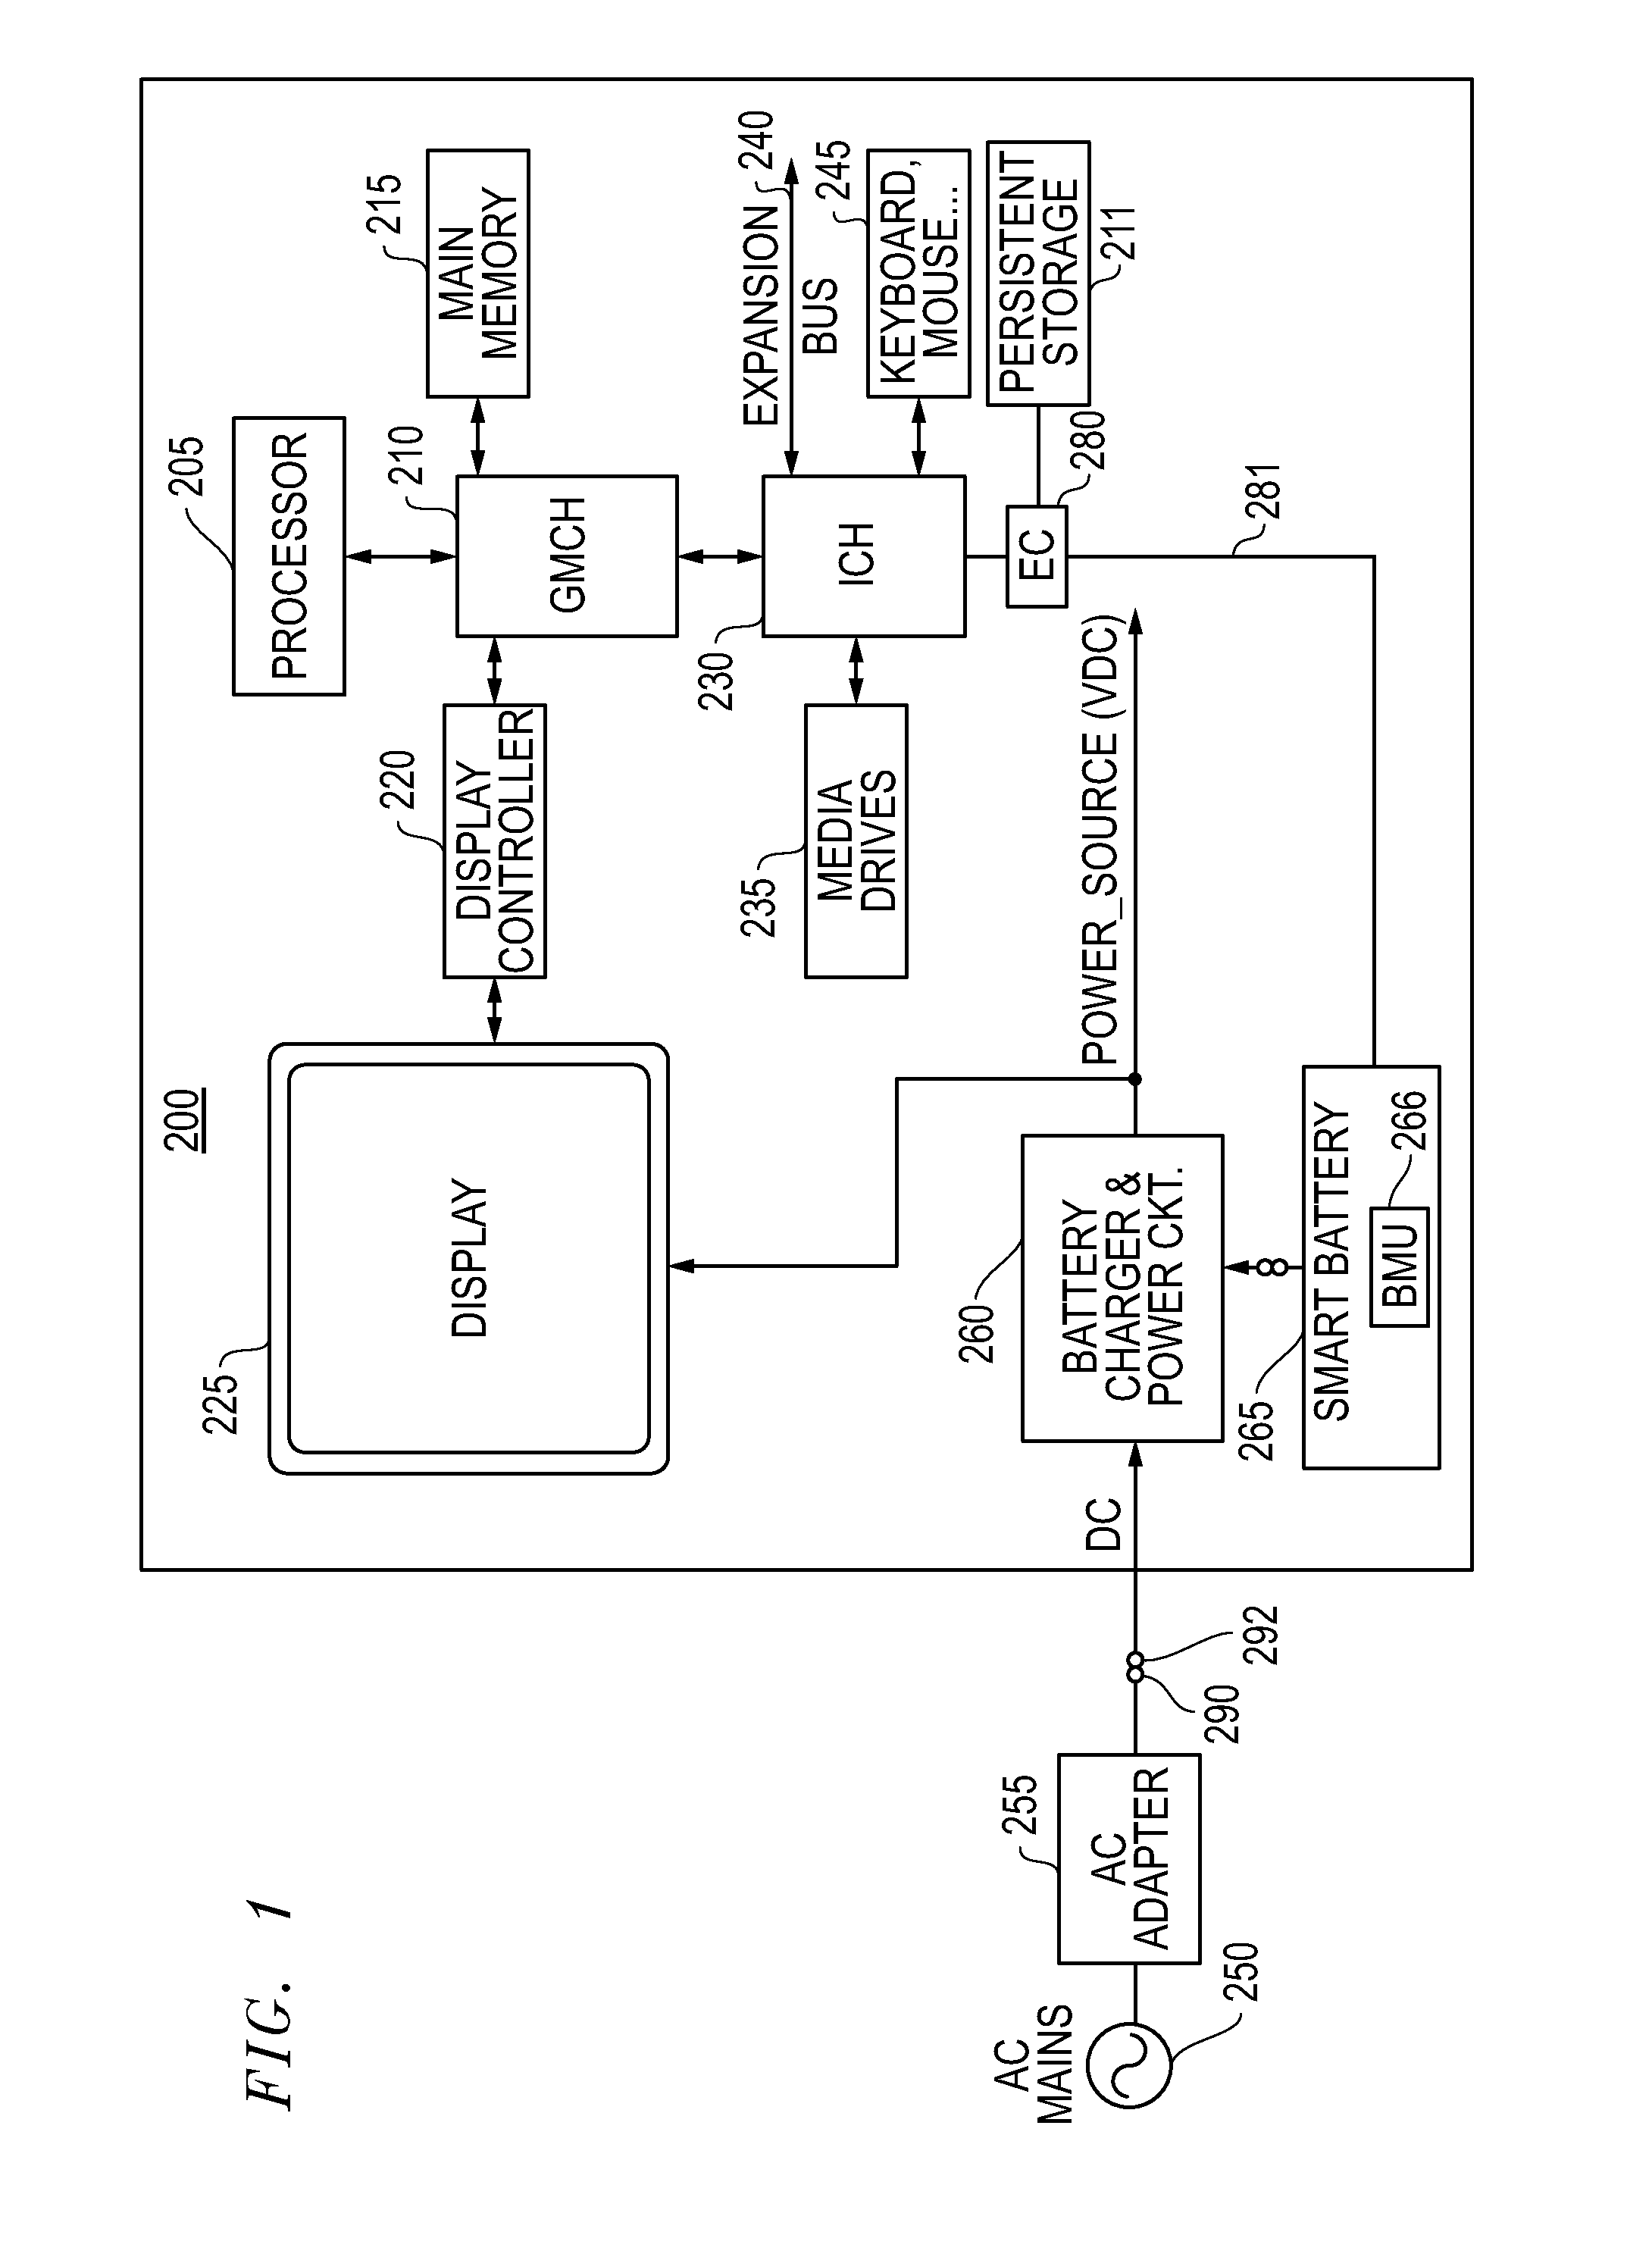 Systems and methods for implementing persistent battery shutdown for information handling systems